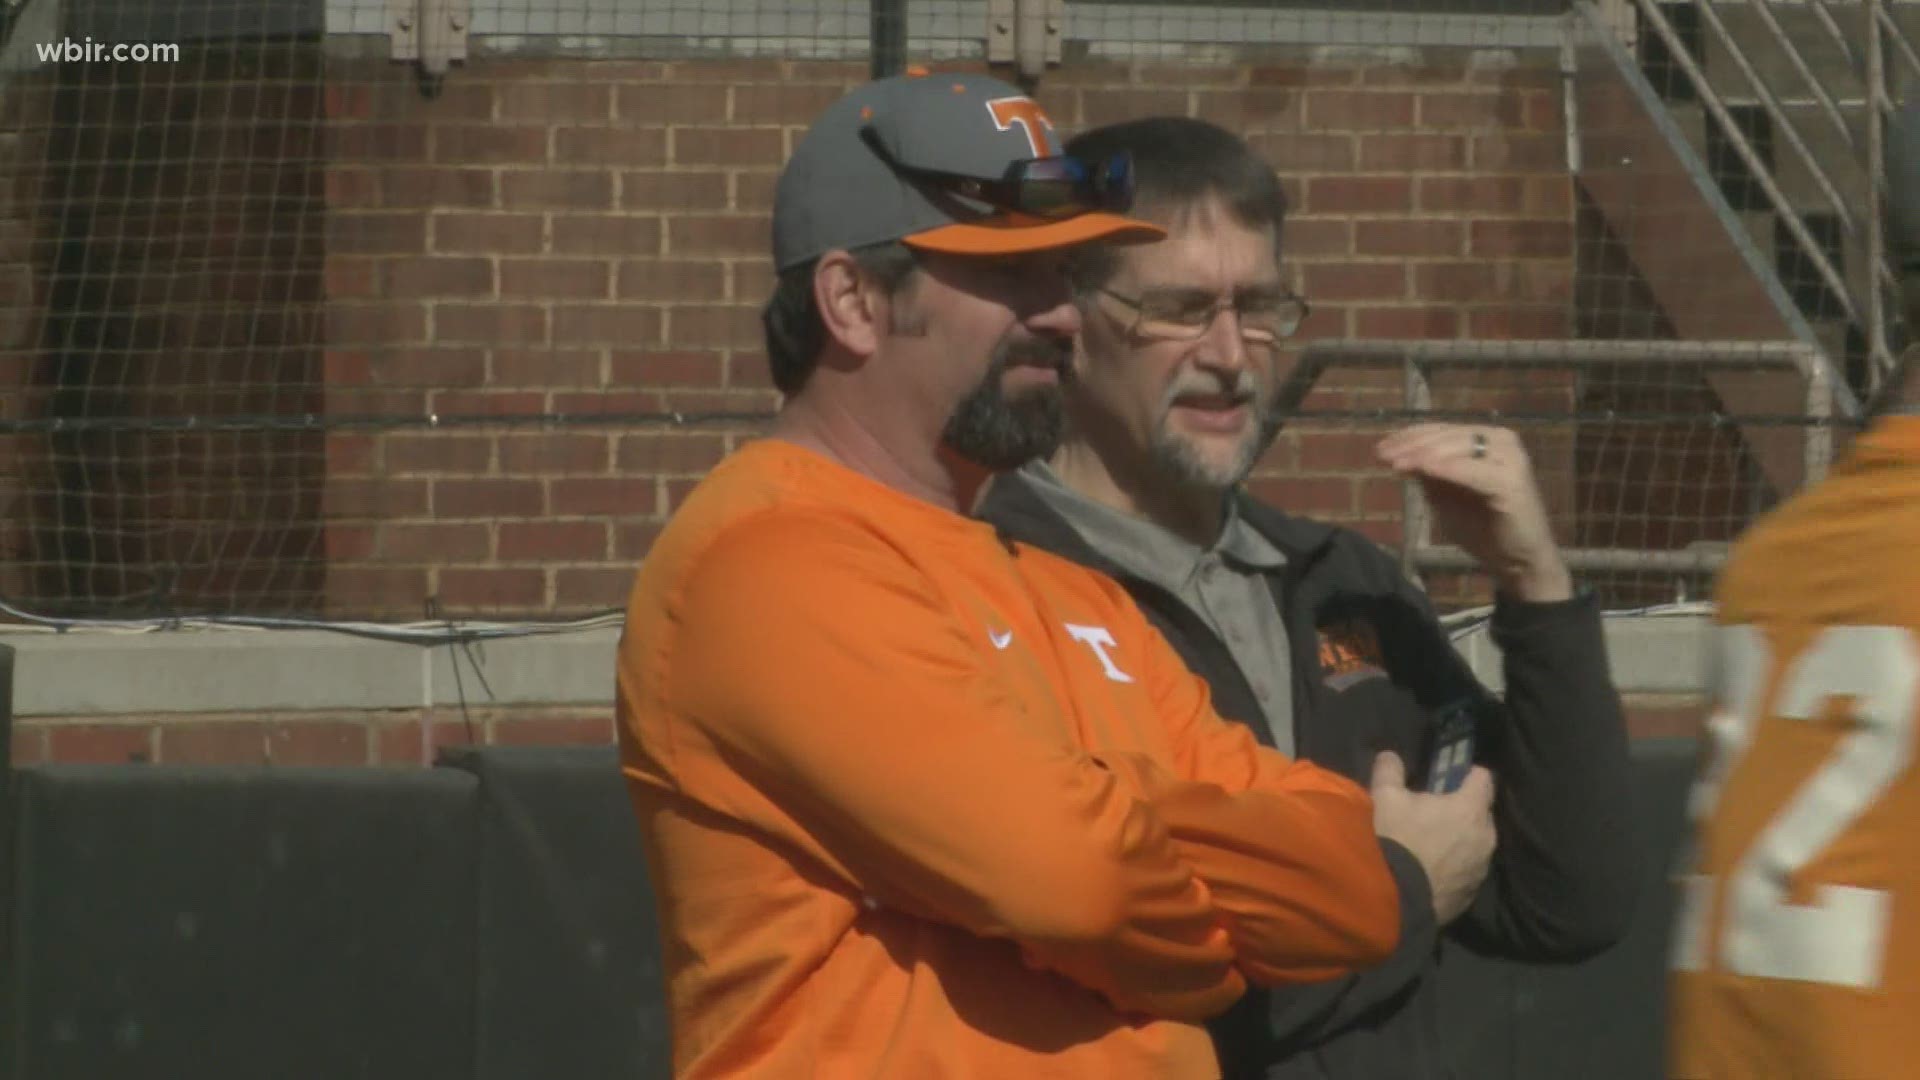 Helton is known for leading the baseball team and playing football while on Rocky Top back in the 1990s.